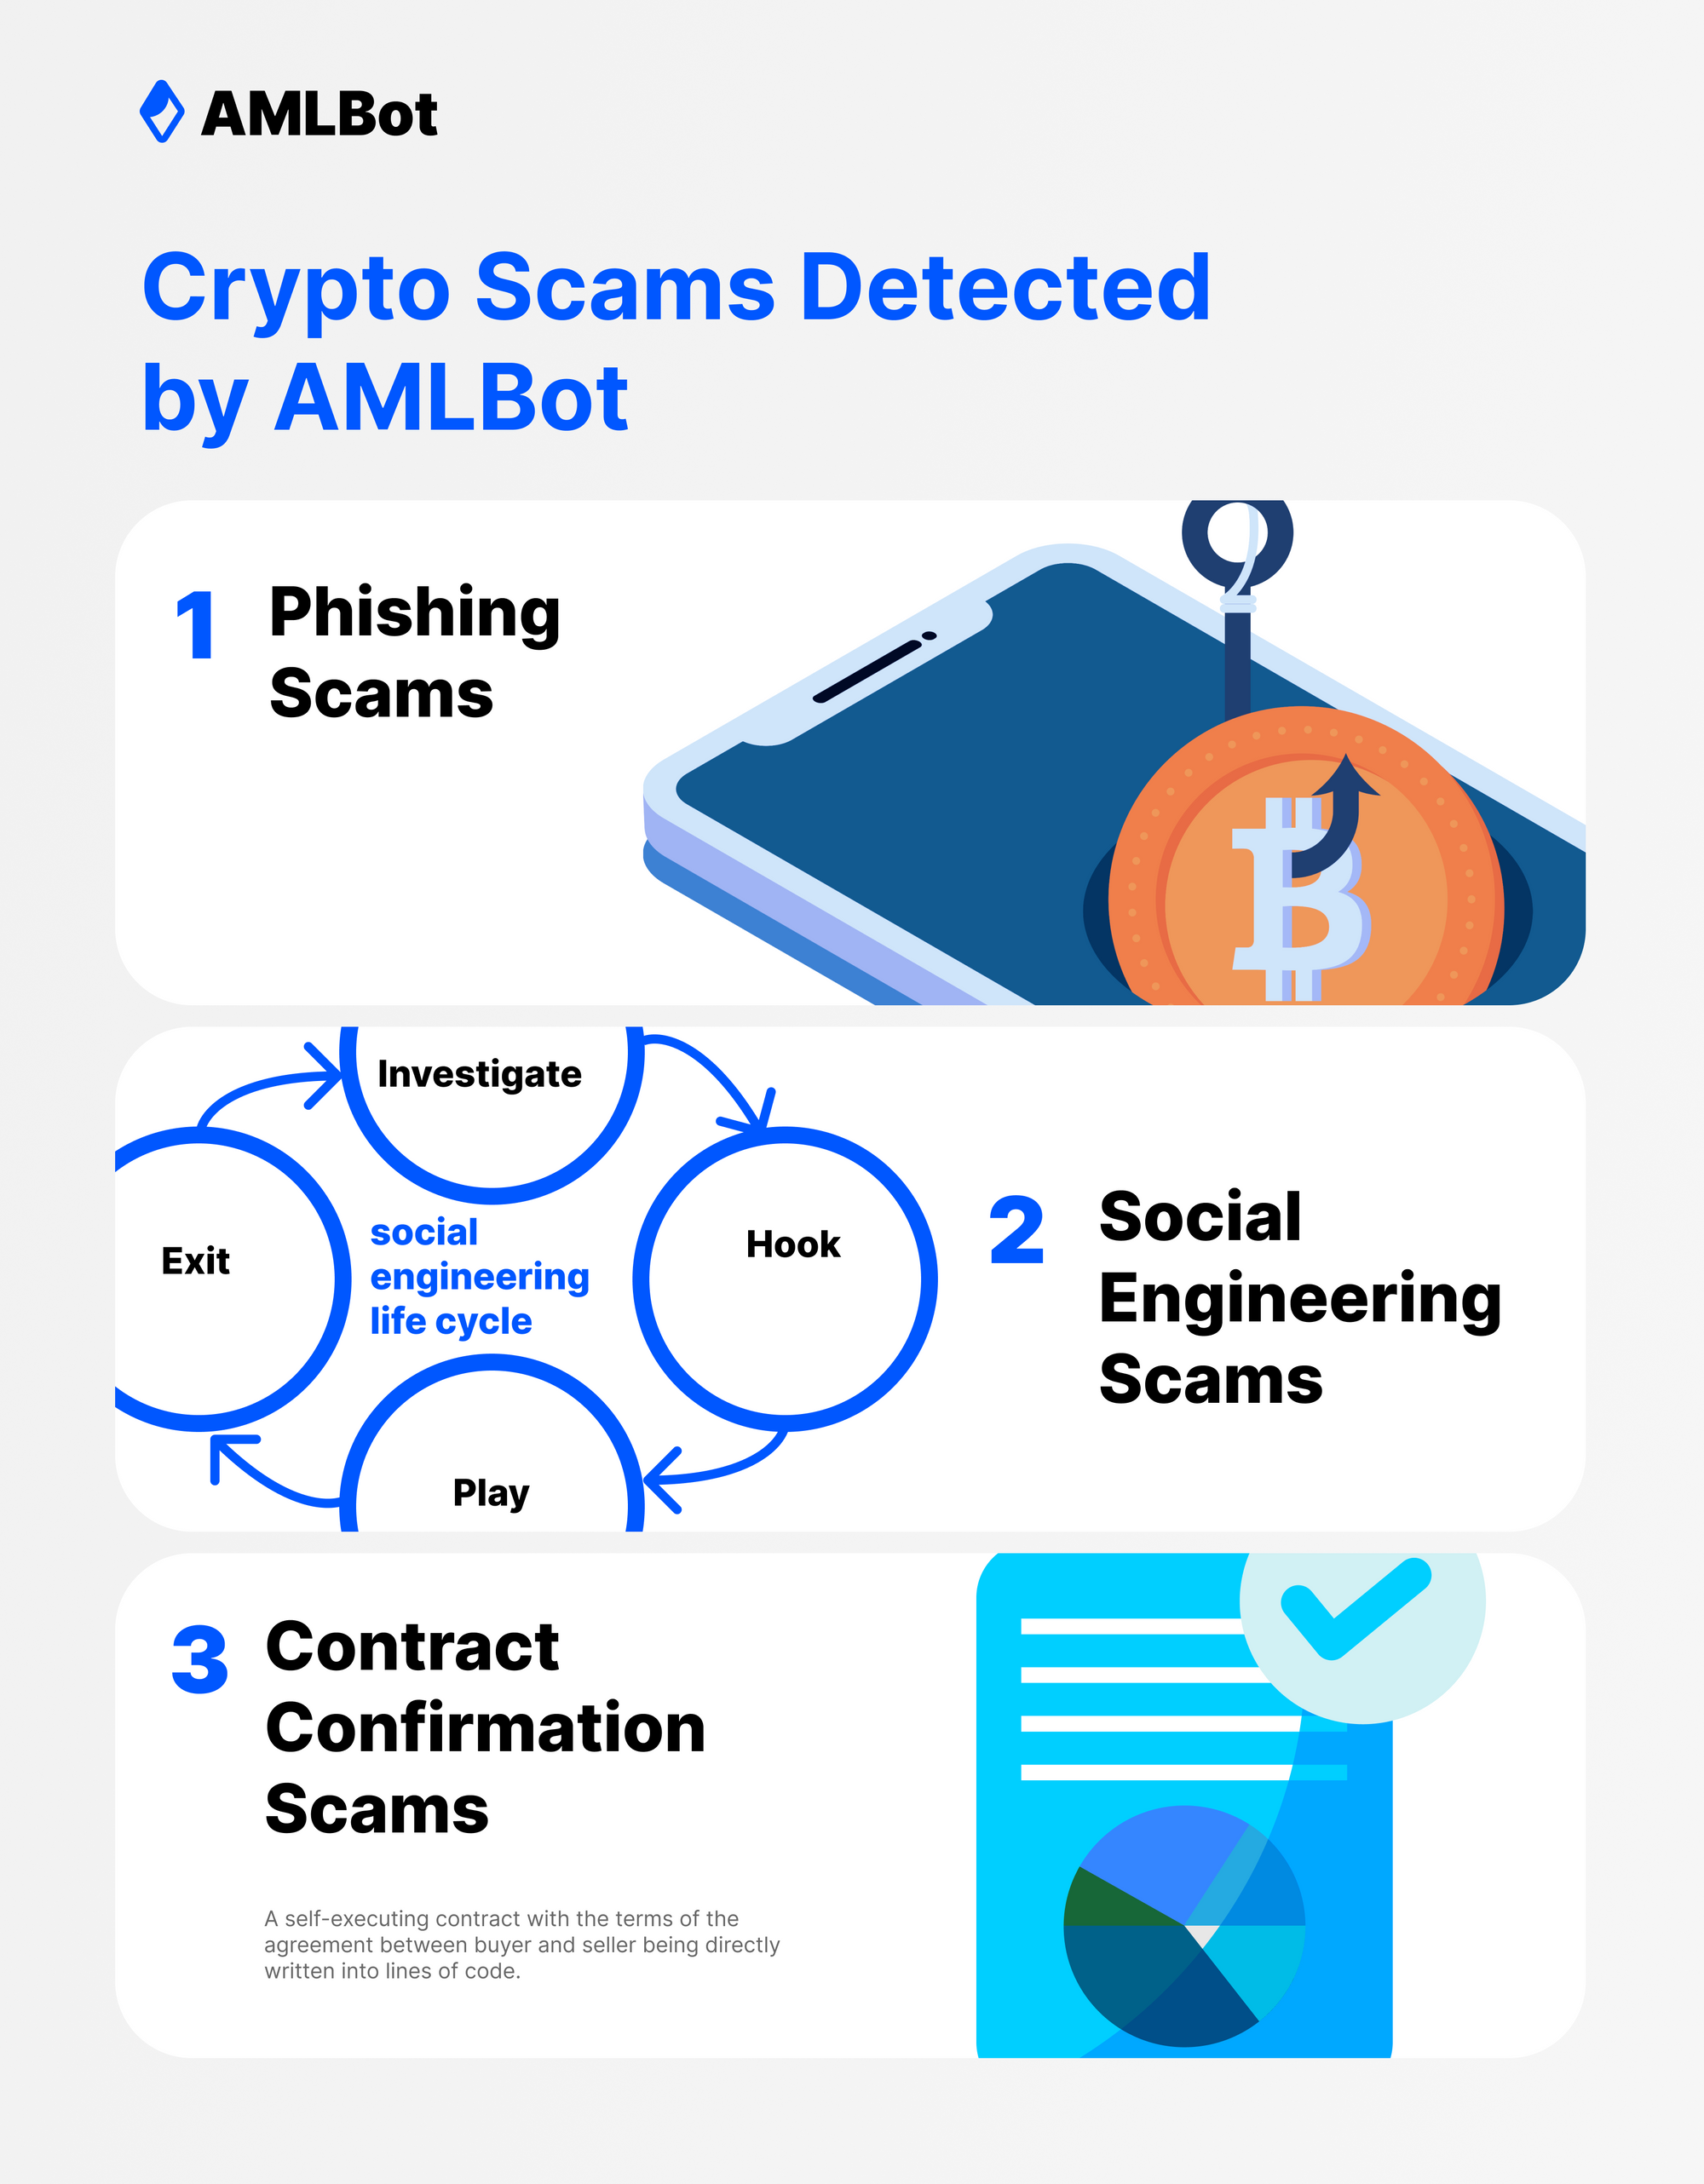 Crypto Scams That AMLBot Detected